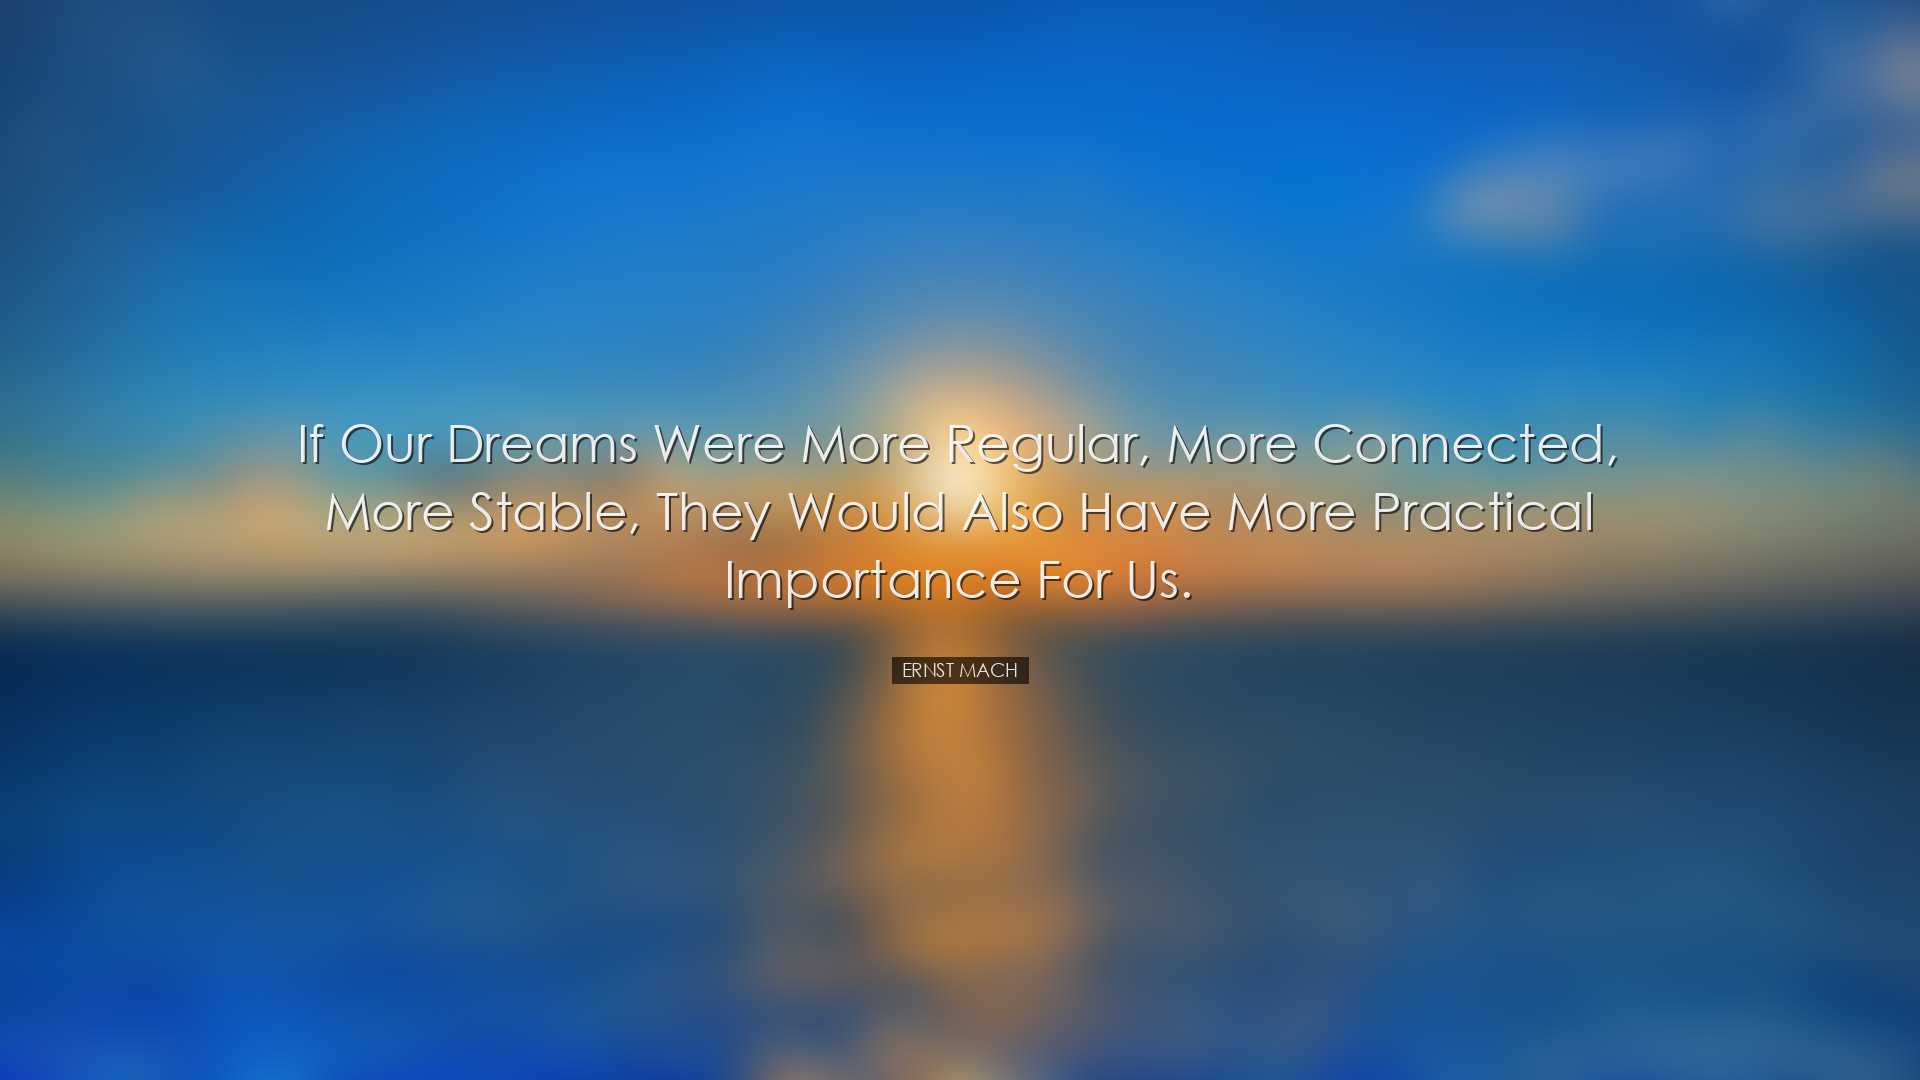 If our dreams were more regular, more connected, more stable, they